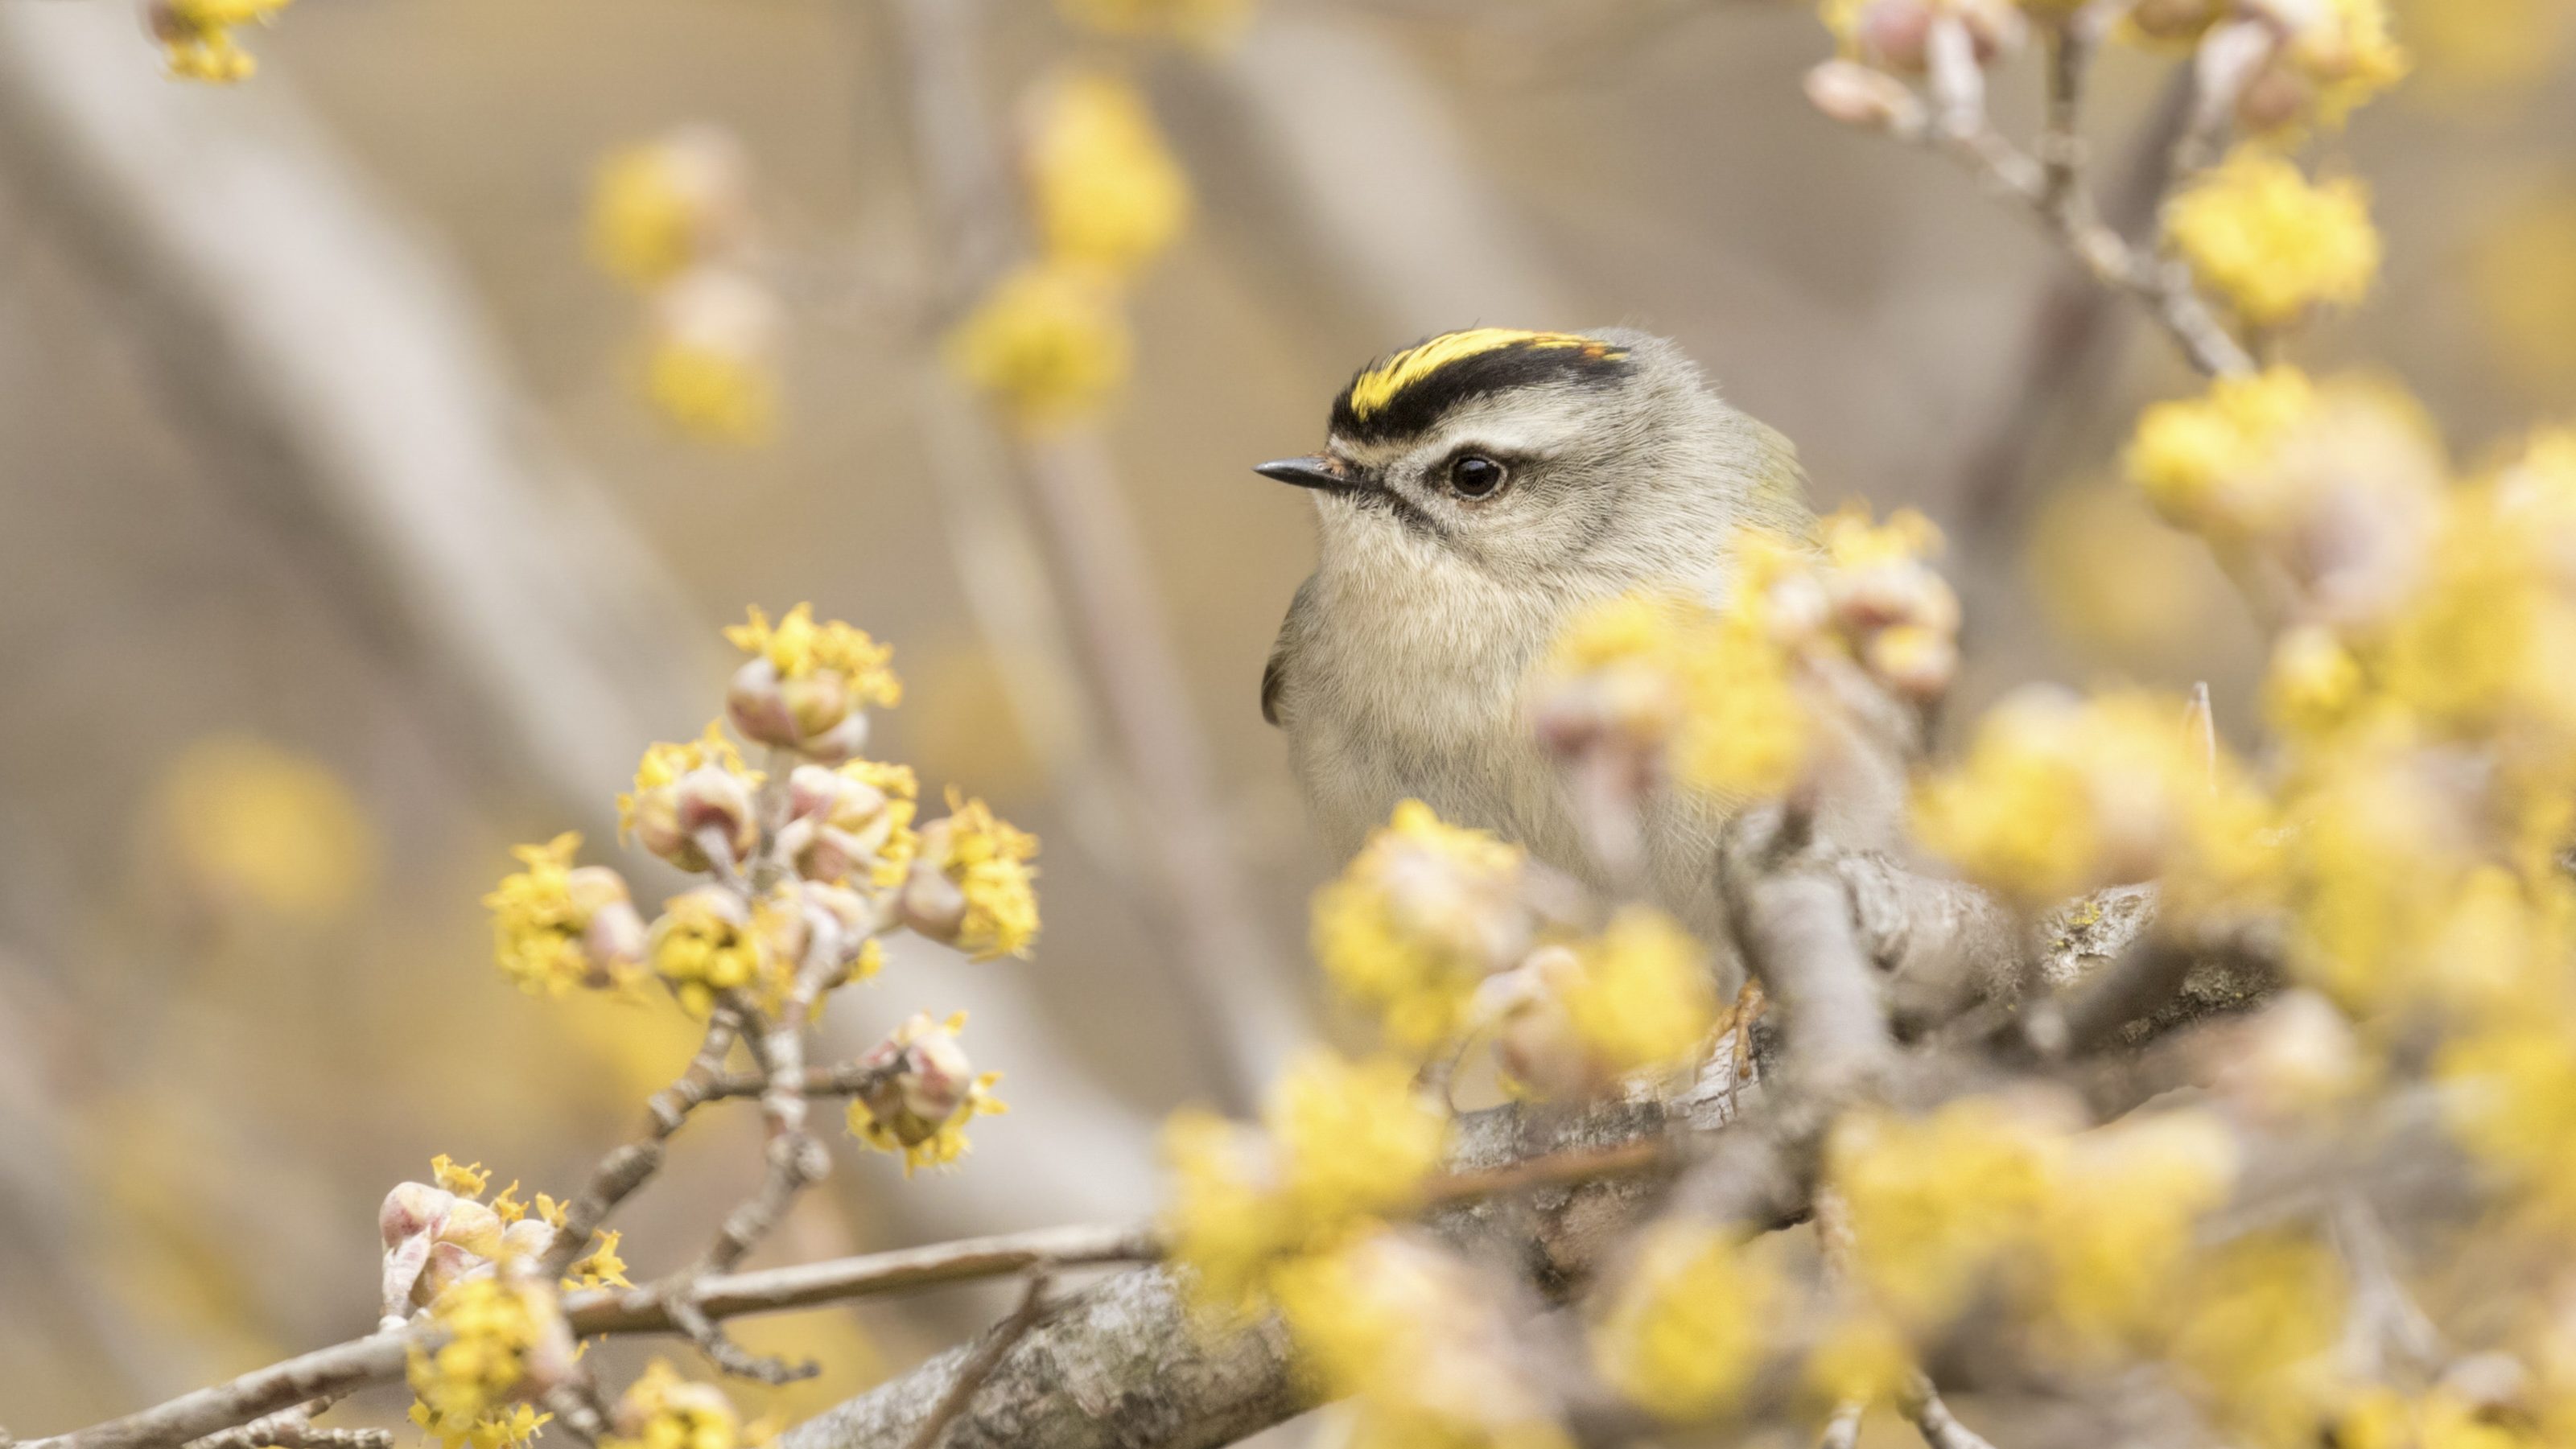 small bird with yellow feather crest perched among flowers